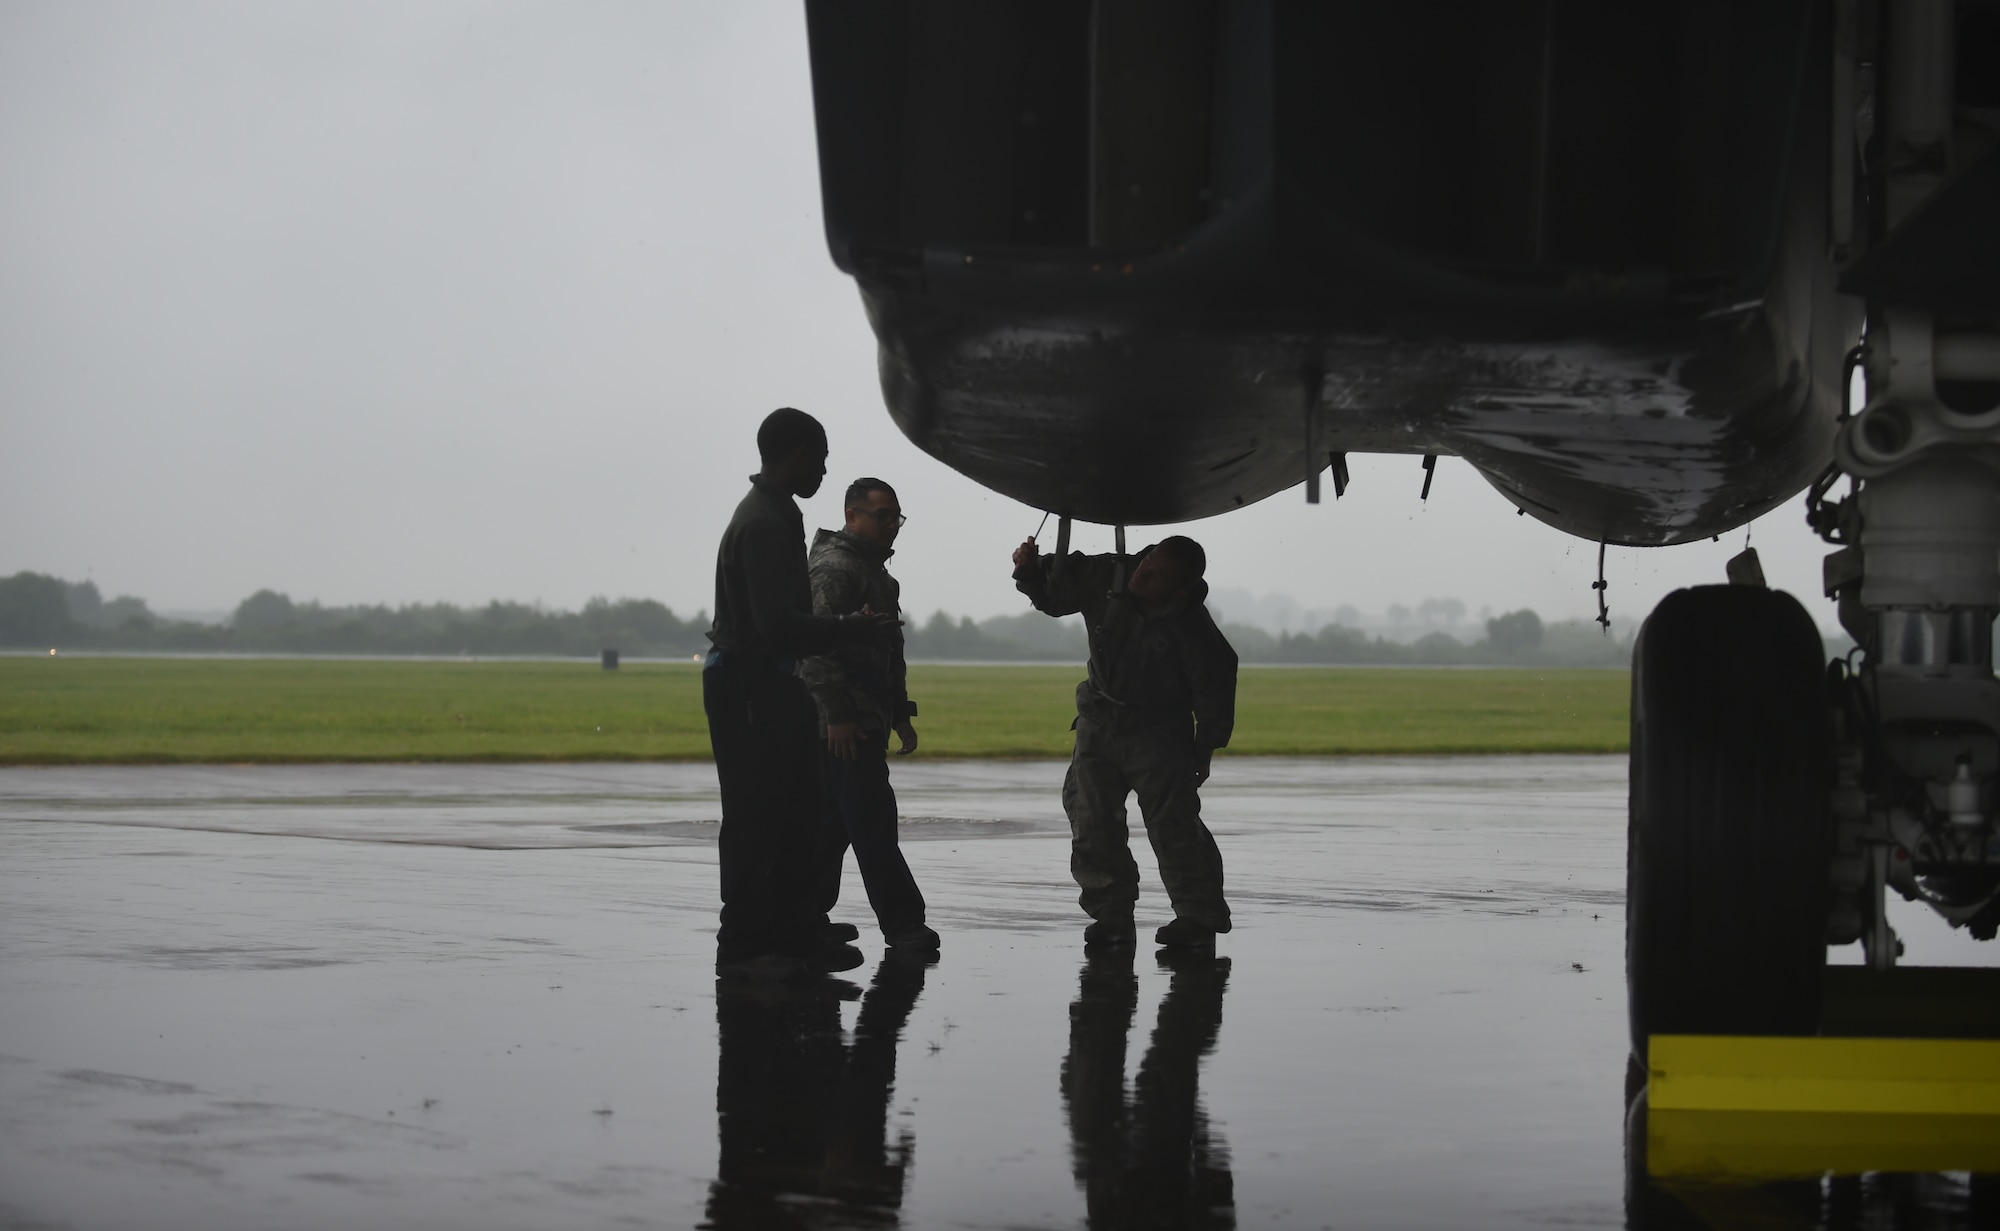 U.S. Air Force Airmen assigned to 345th Bomb Squadron at Dyess Air Force Base, Texas, conduct post-flight maintenance after the three-ship B-1B Lancer arrival at RAF Fairford, U.K., May 30, 2018. Maintenance members are responsible for ensuring the proper and timely servicing of the aircraft while at home station and deployed, which fortifies the bomber’s ability to combat targets, anytime and anywhere. (U.S. Air Force photo by Senior Airman Emily Copeland)